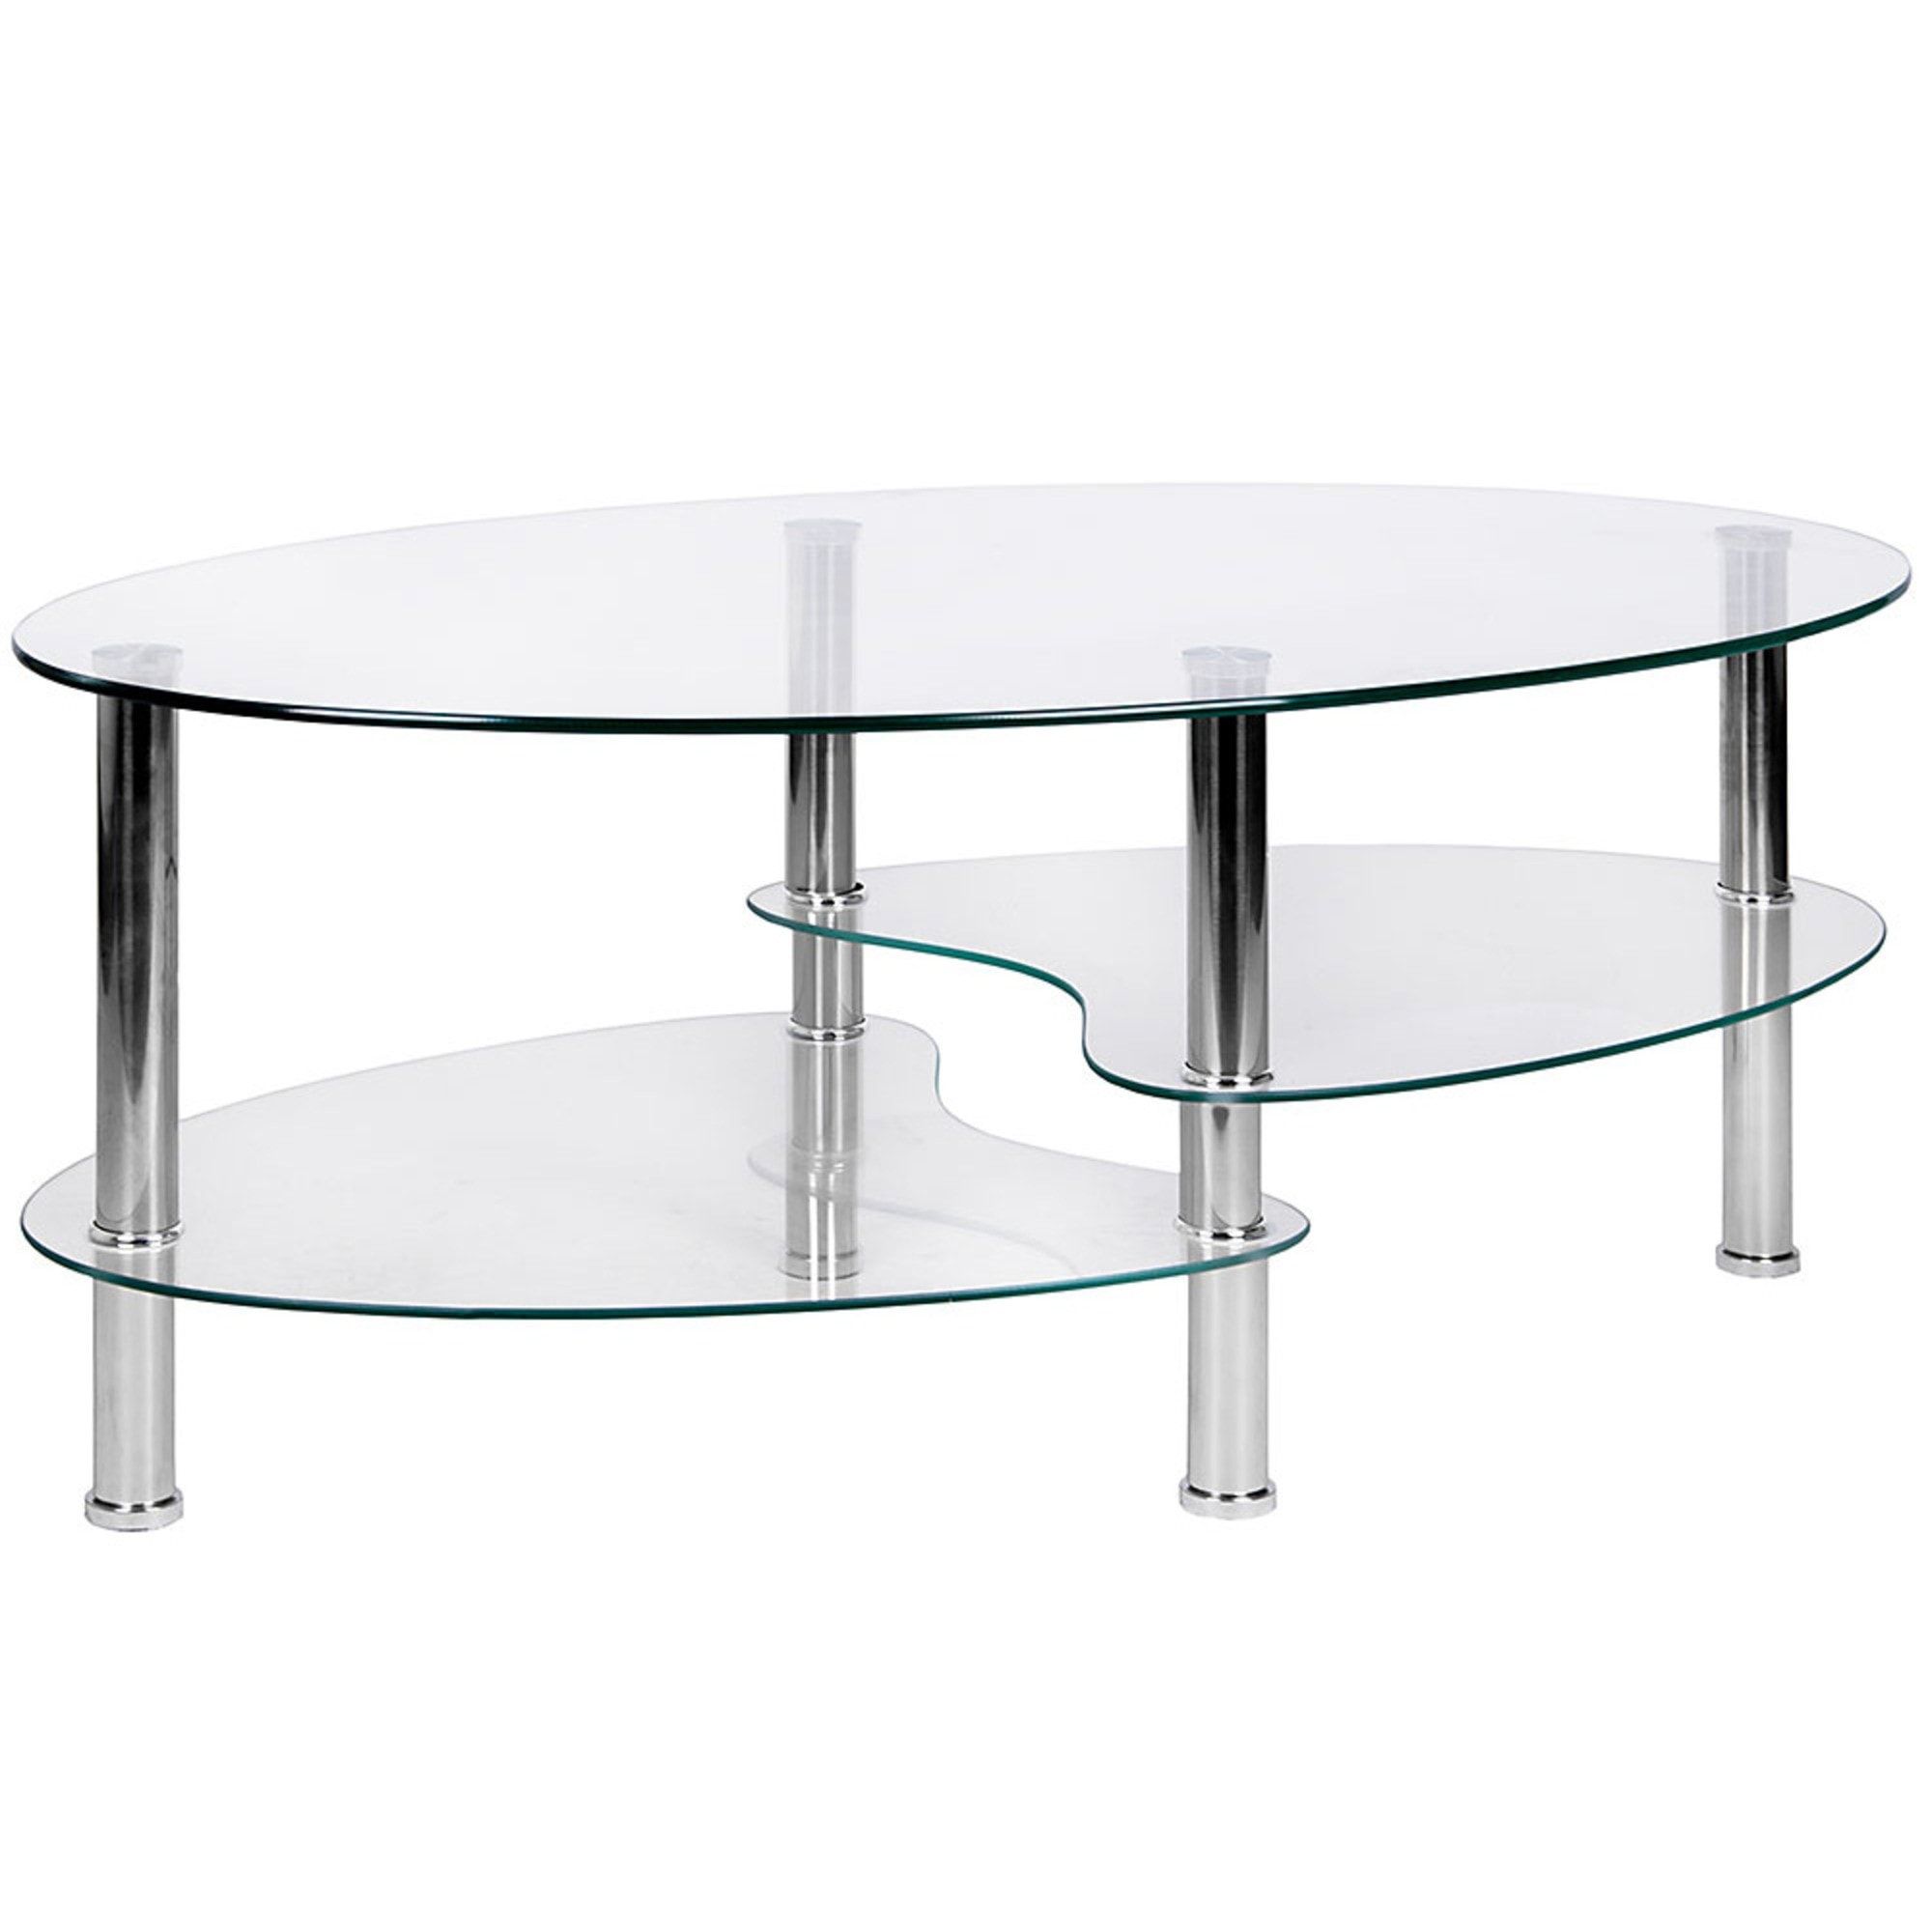 Cara Oval Clear Glass Coffee Table | Dining | Glass Furniture In Glass Oval Coffee Tables (View 12 of 15)